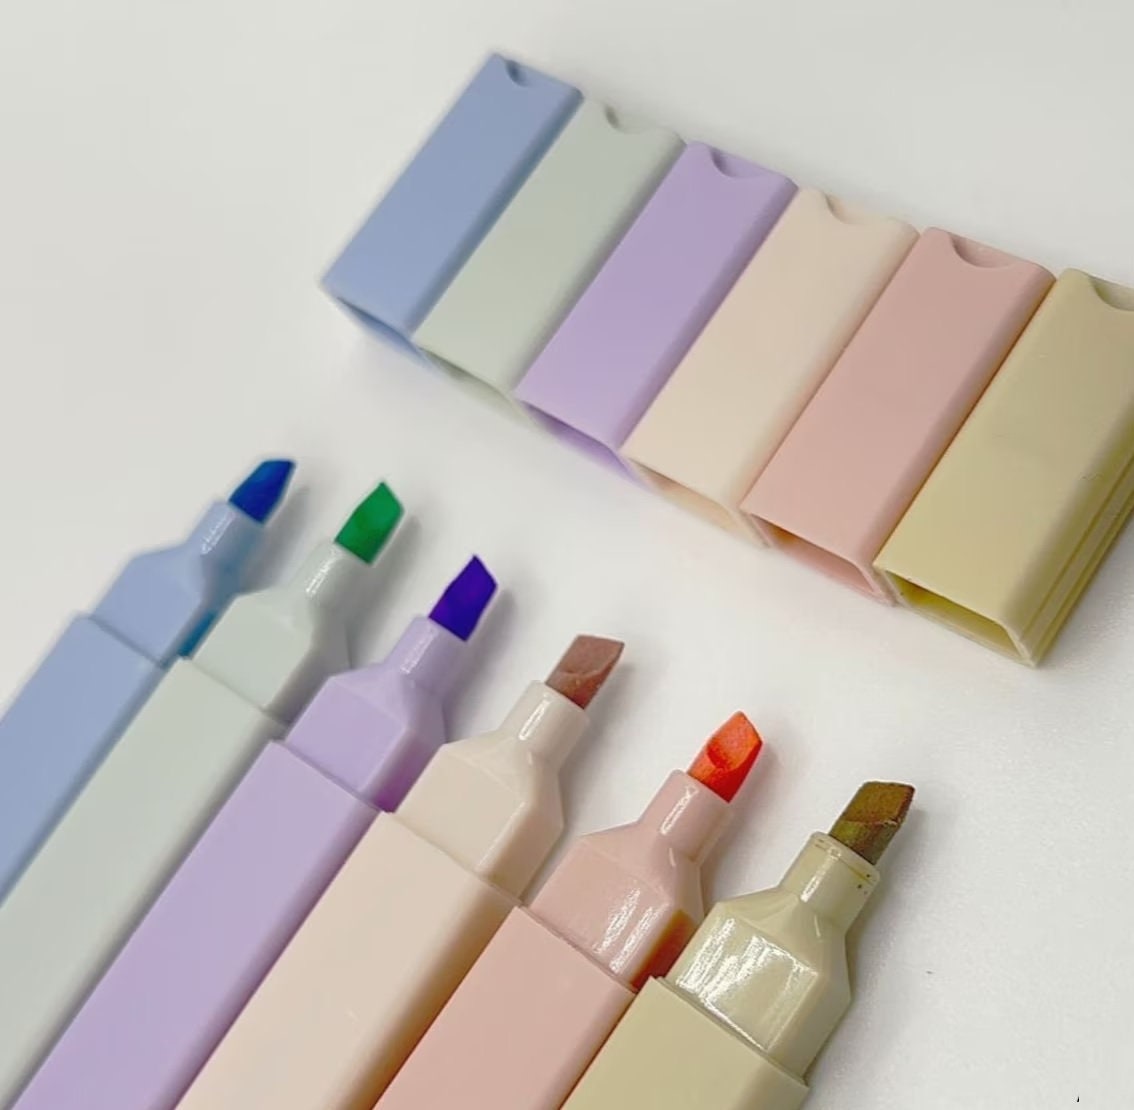 Stabilo Swing Cool Pastel Highlighter Pens Available in Turquoise, Milky  Yellow, Pink Blush, Lilac Haze, Creamy Peach or Hint of Mint. 